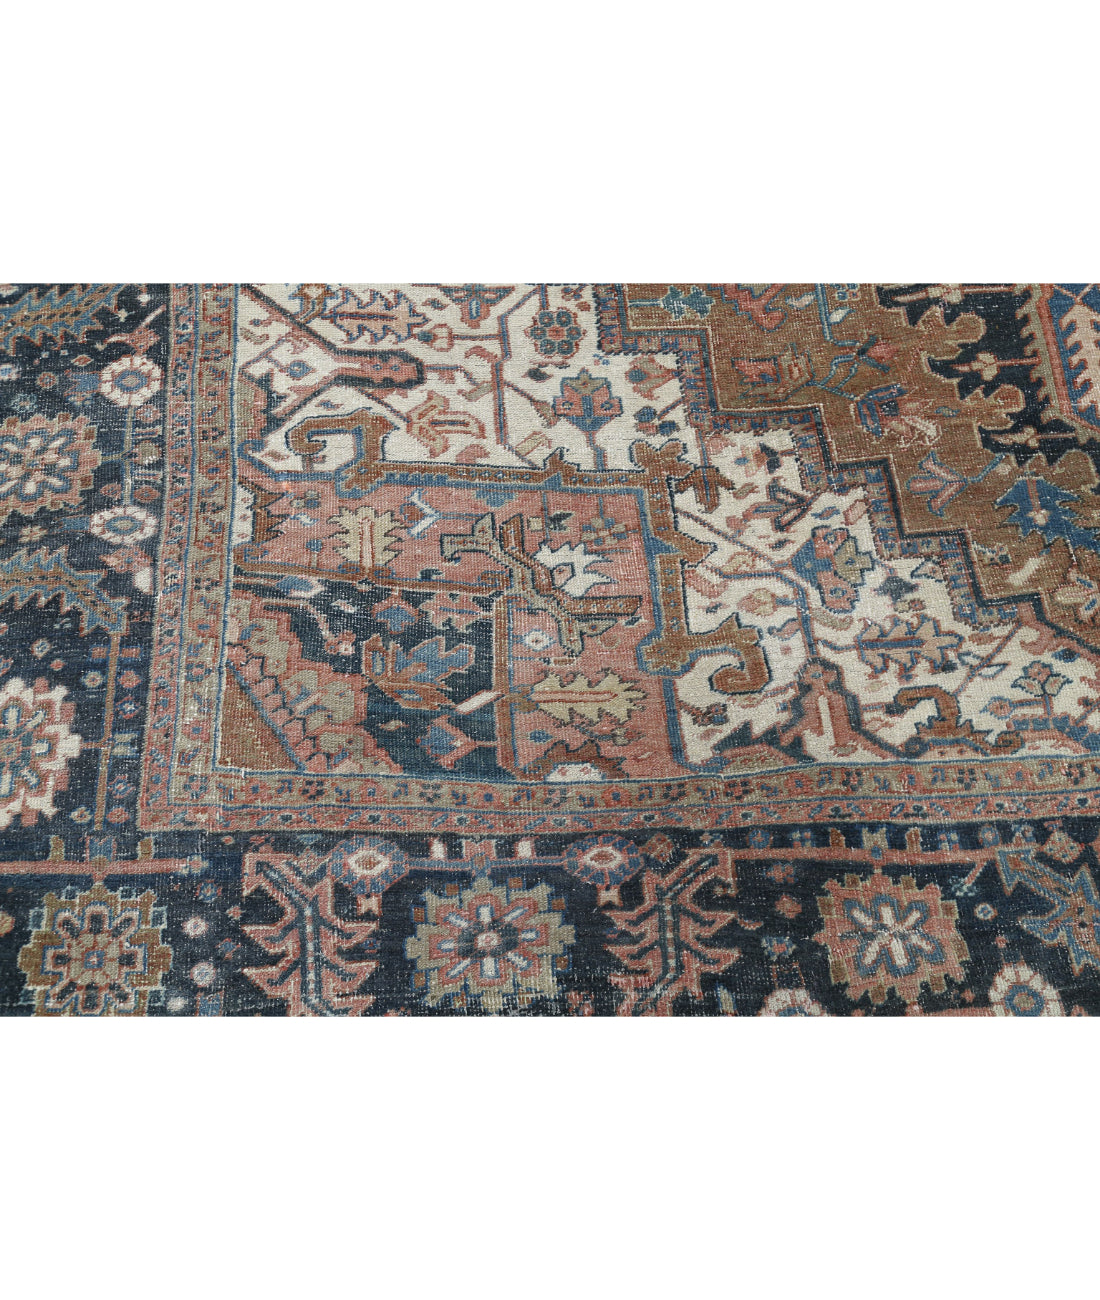 Hand Knotted Antique Persian Heriz Wool Rug - 10'6'' x 12'6'' 10'6'' x 12'6'' (315 X 375) / Tan / Blue